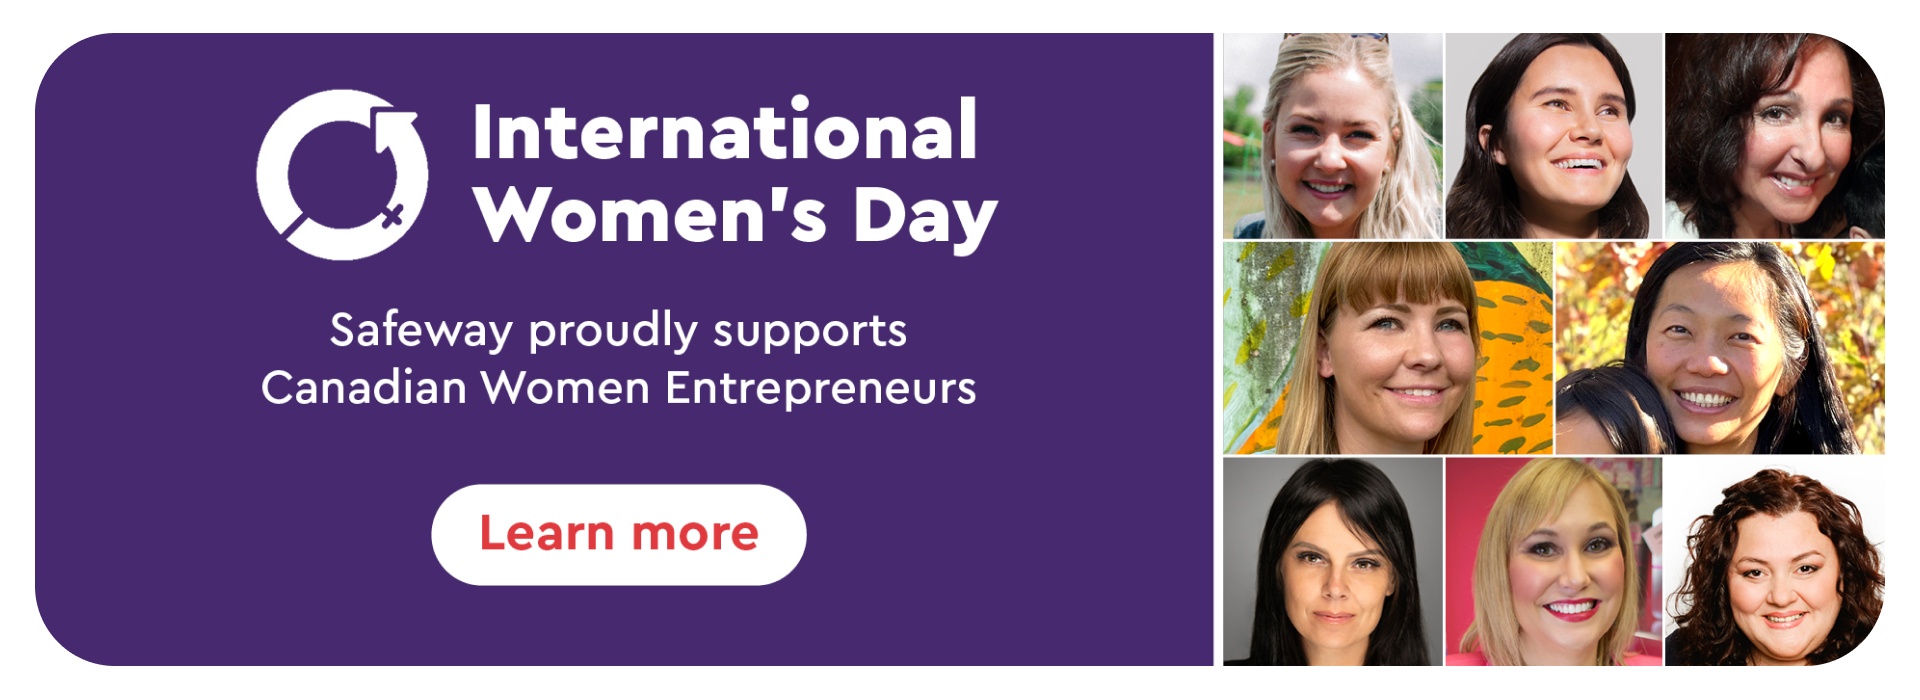 International Womenâ€™s Day, Safeway proudly supports Canadian women entrepreneurs. Learn More